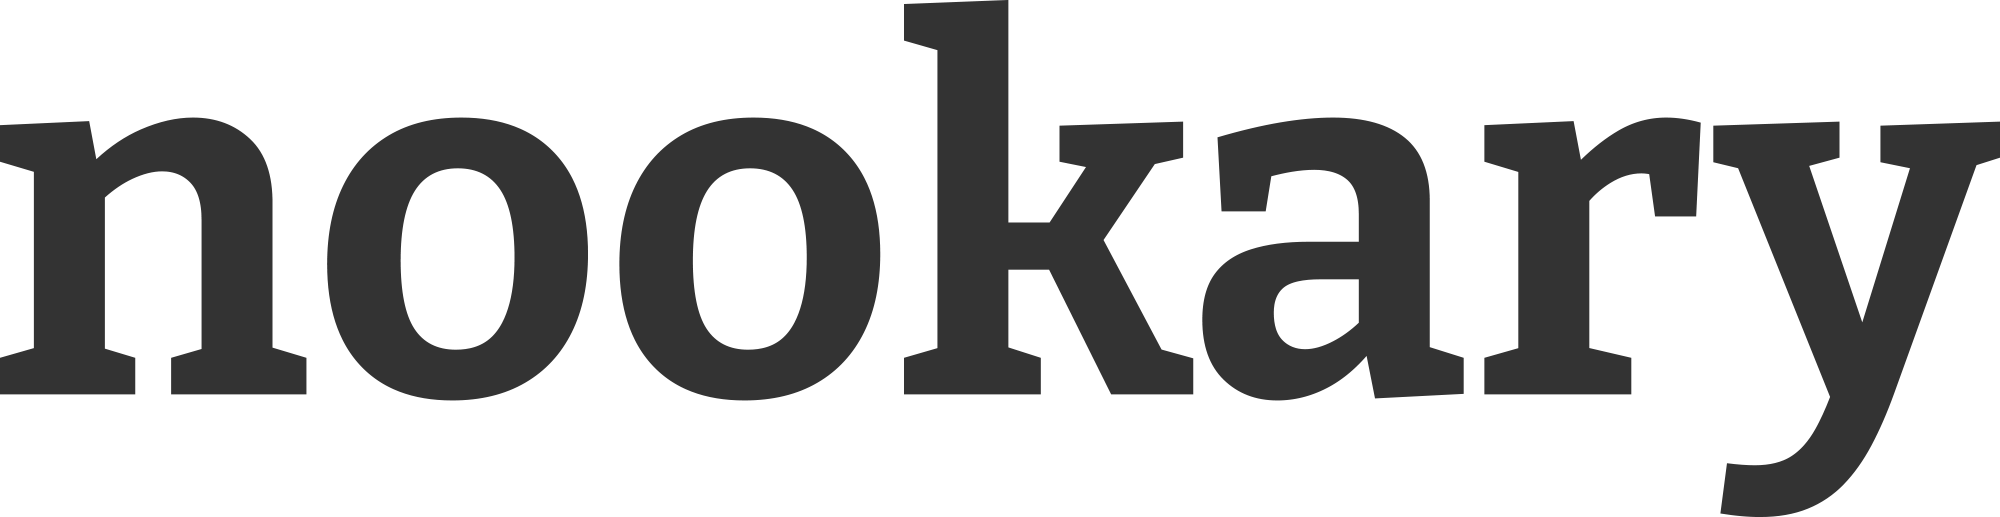 nookary logo black with white background